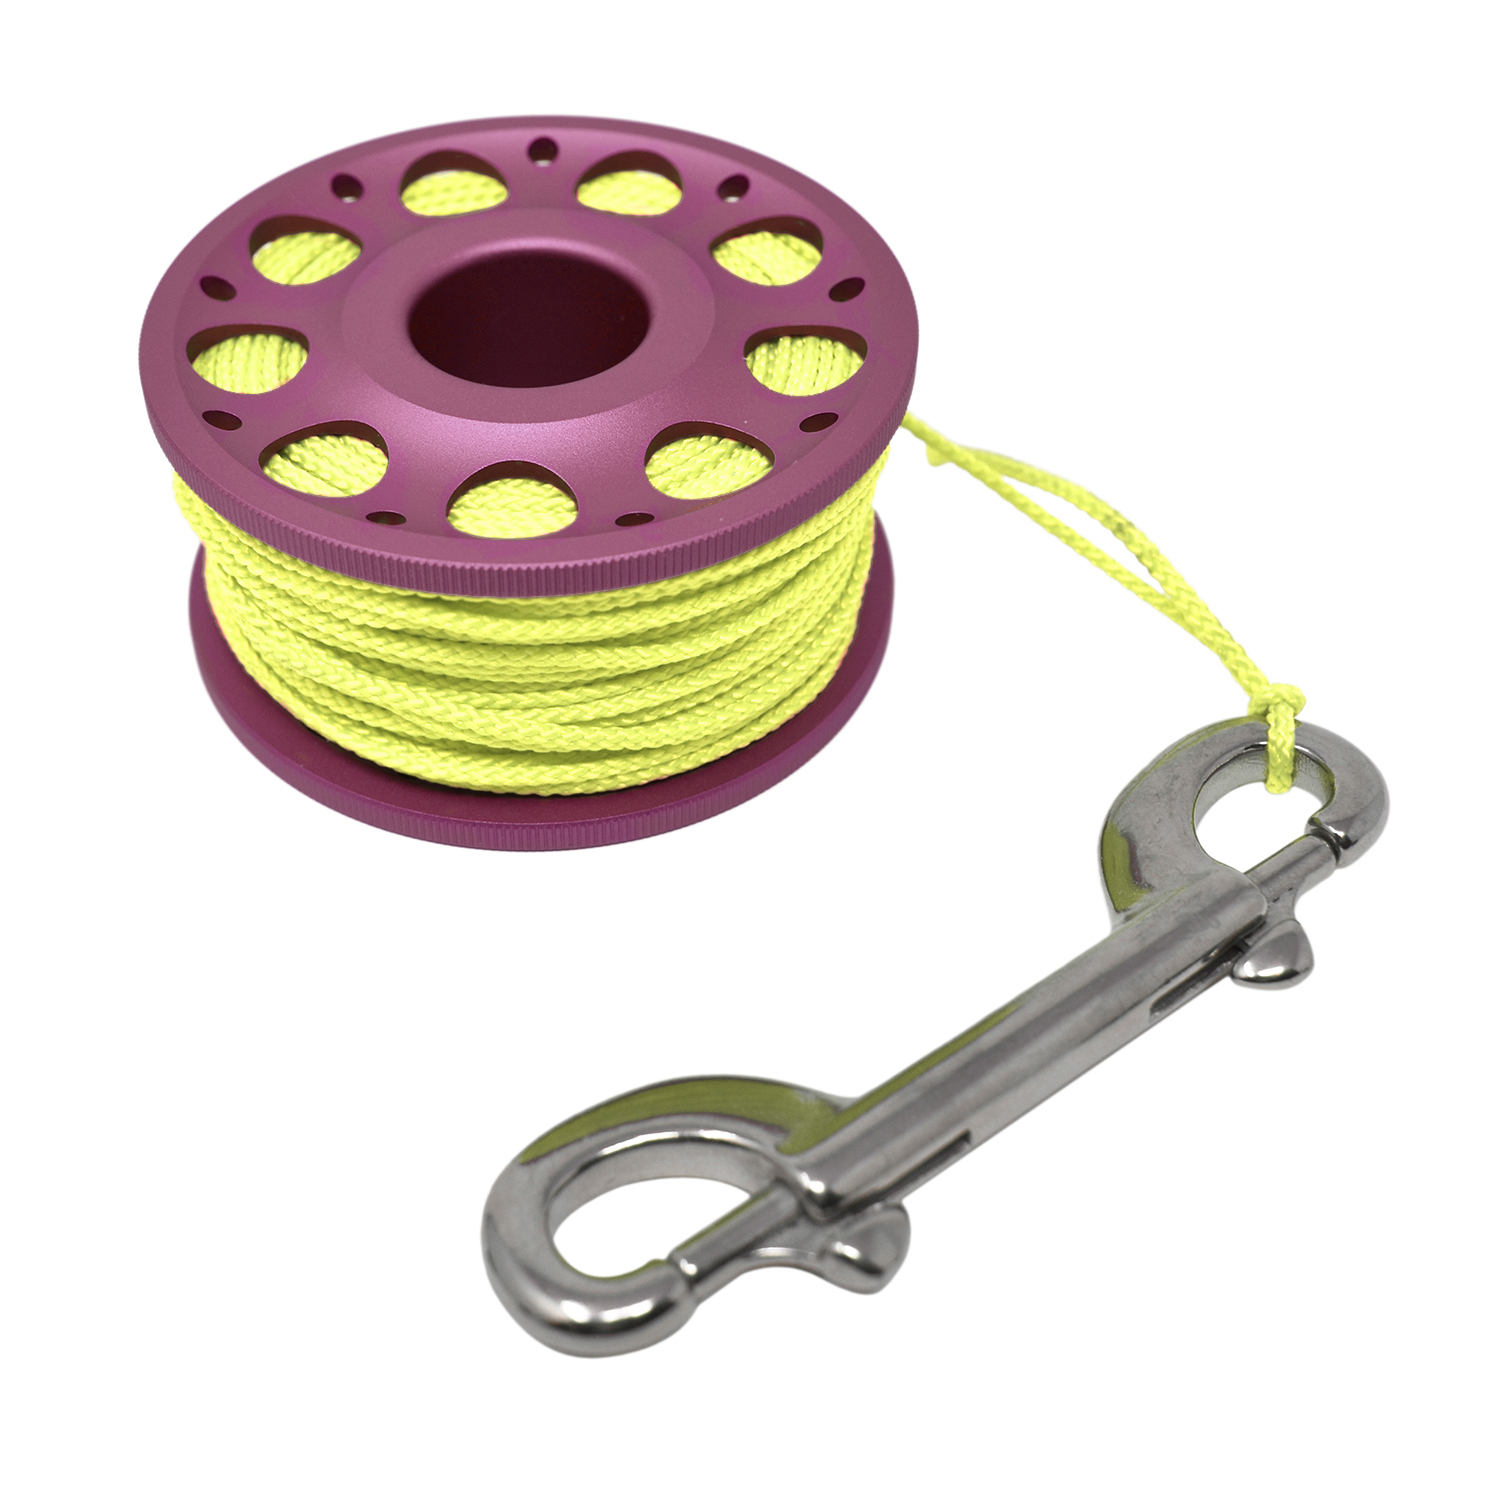 Aluminum Finger Spool 100ft Dive Reel w/ Spinning Holder, Pink/Yellow - image 3 of 4